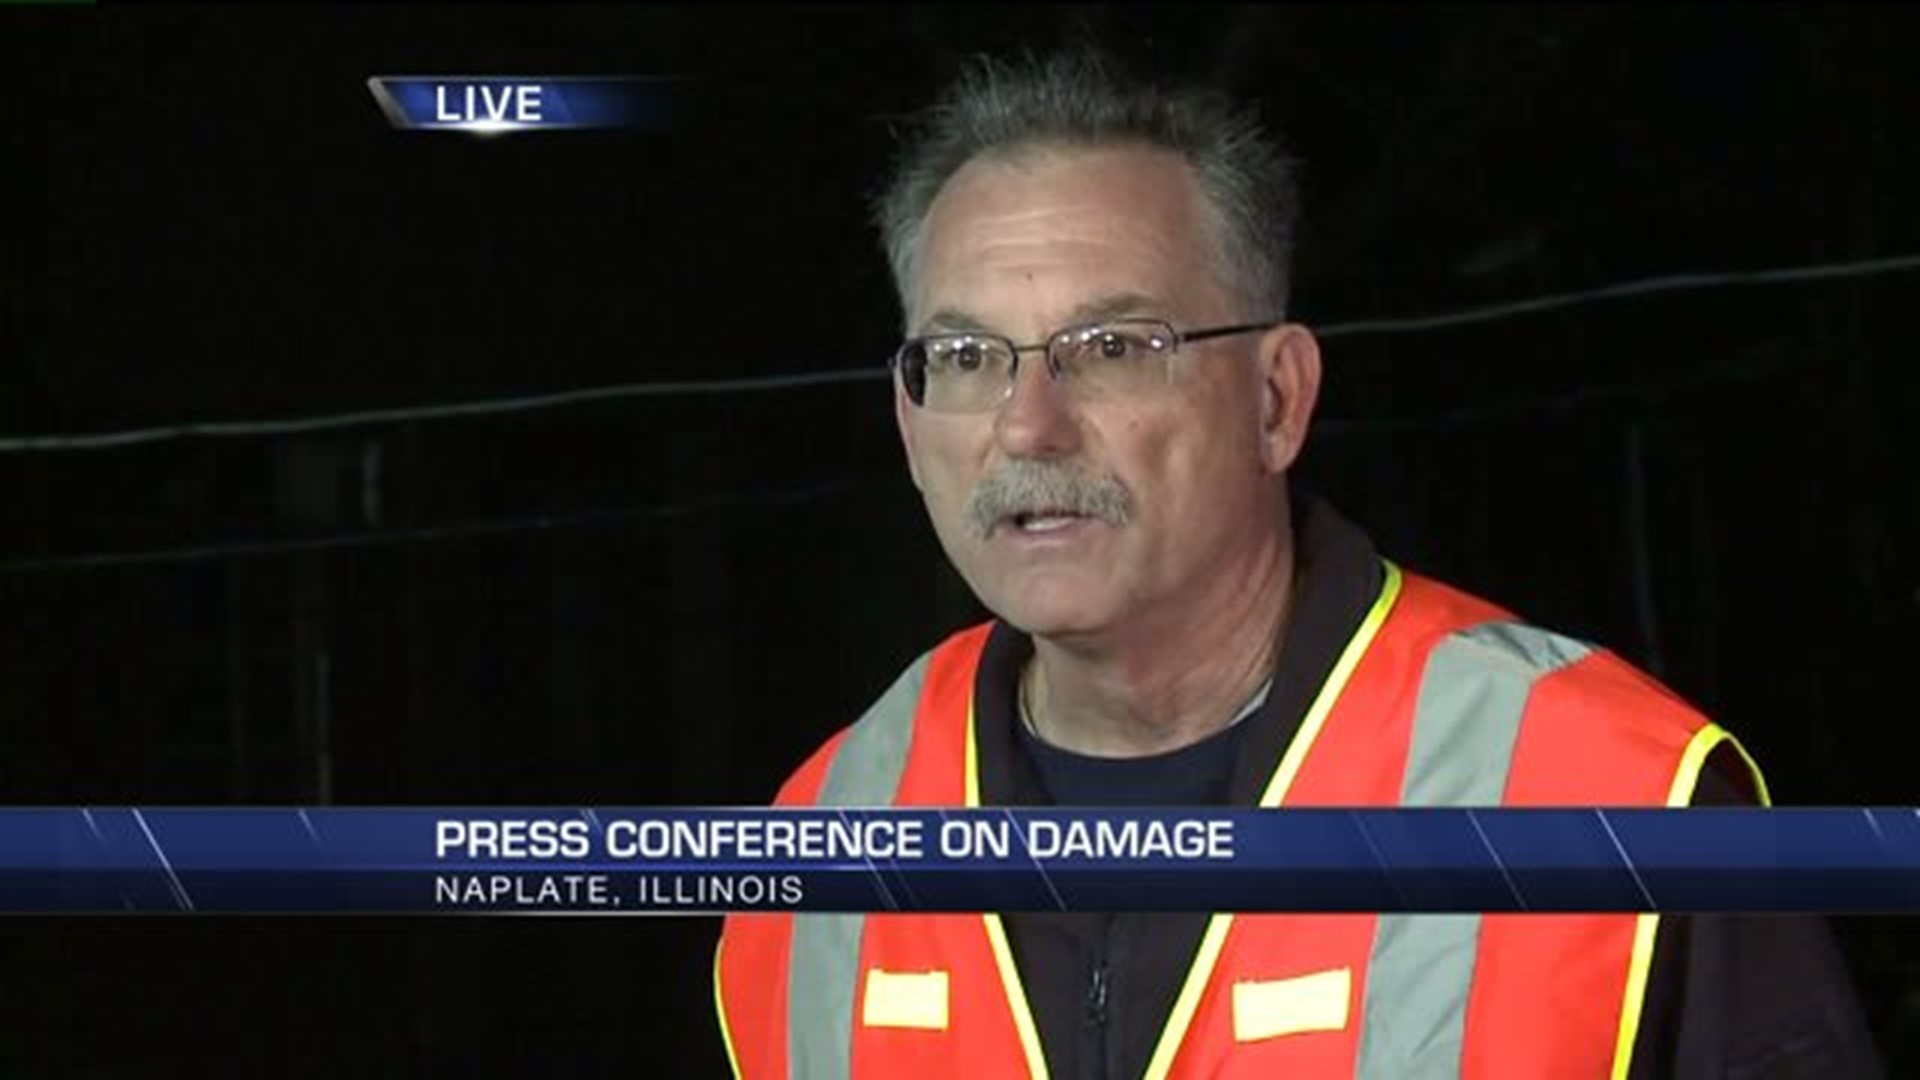 Press Conference on Storm Damage in Naplate, Illinois